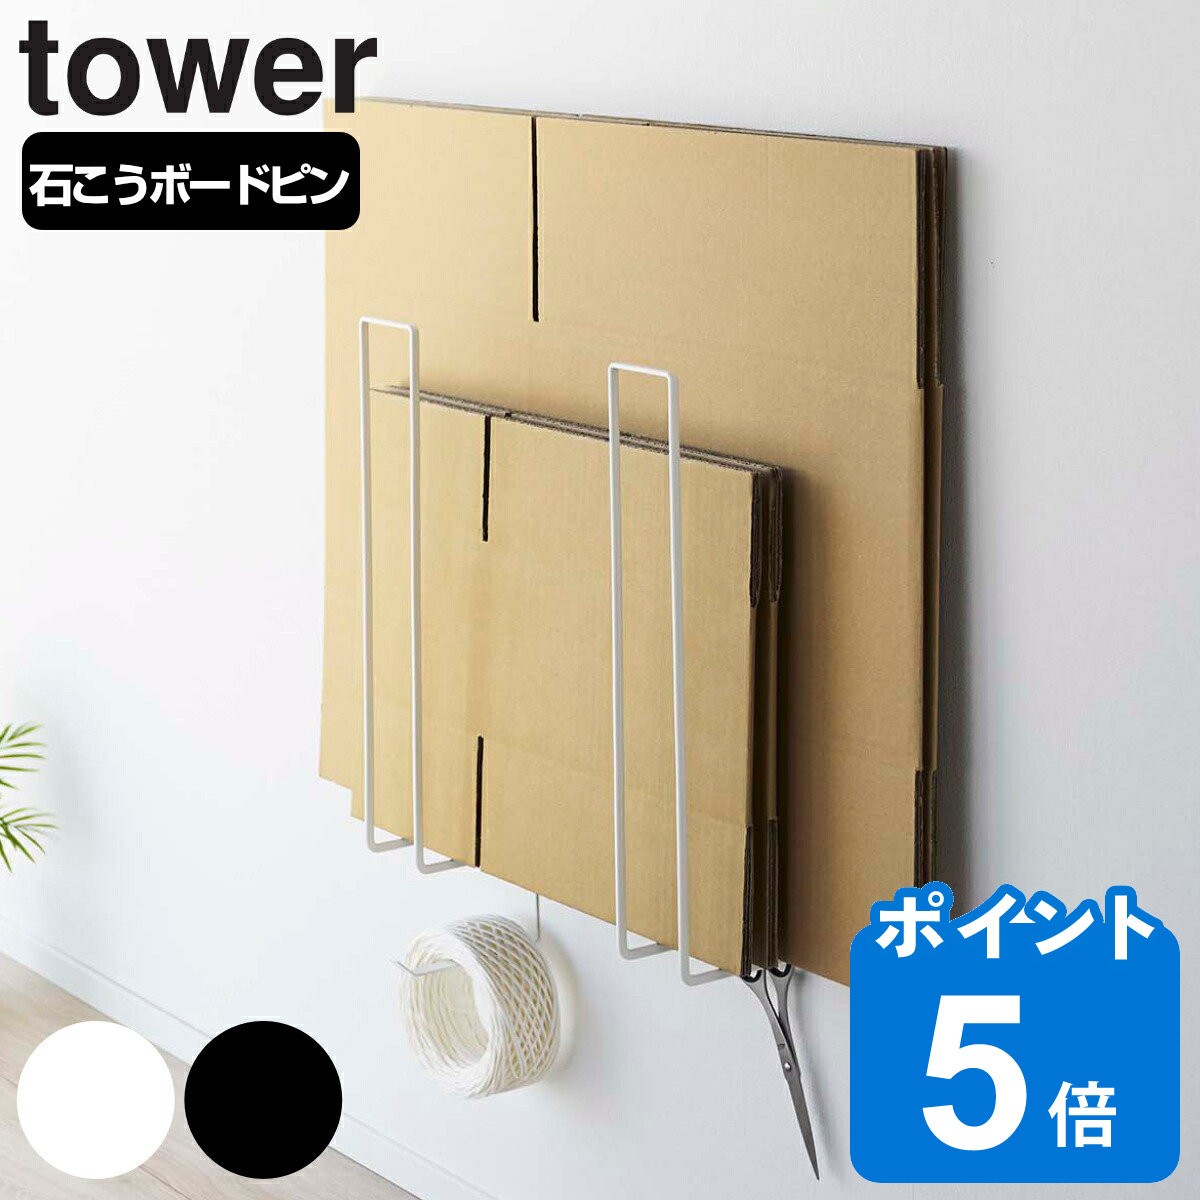 R tower EH[i{[XgbJ[ ^[